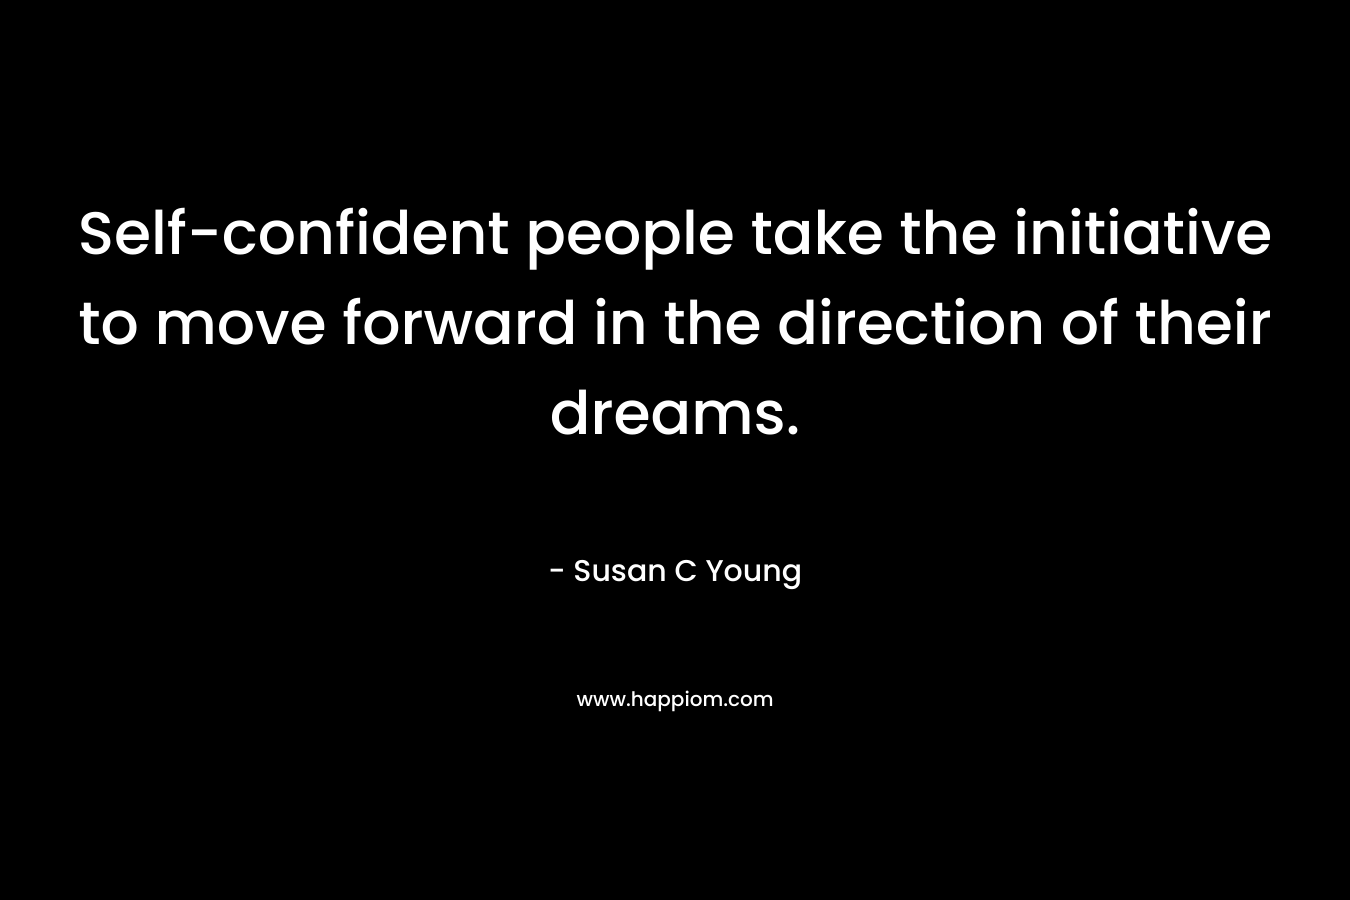 Self-confident people take the initiative to move forward in the direction of their dreams. – Susan C Young